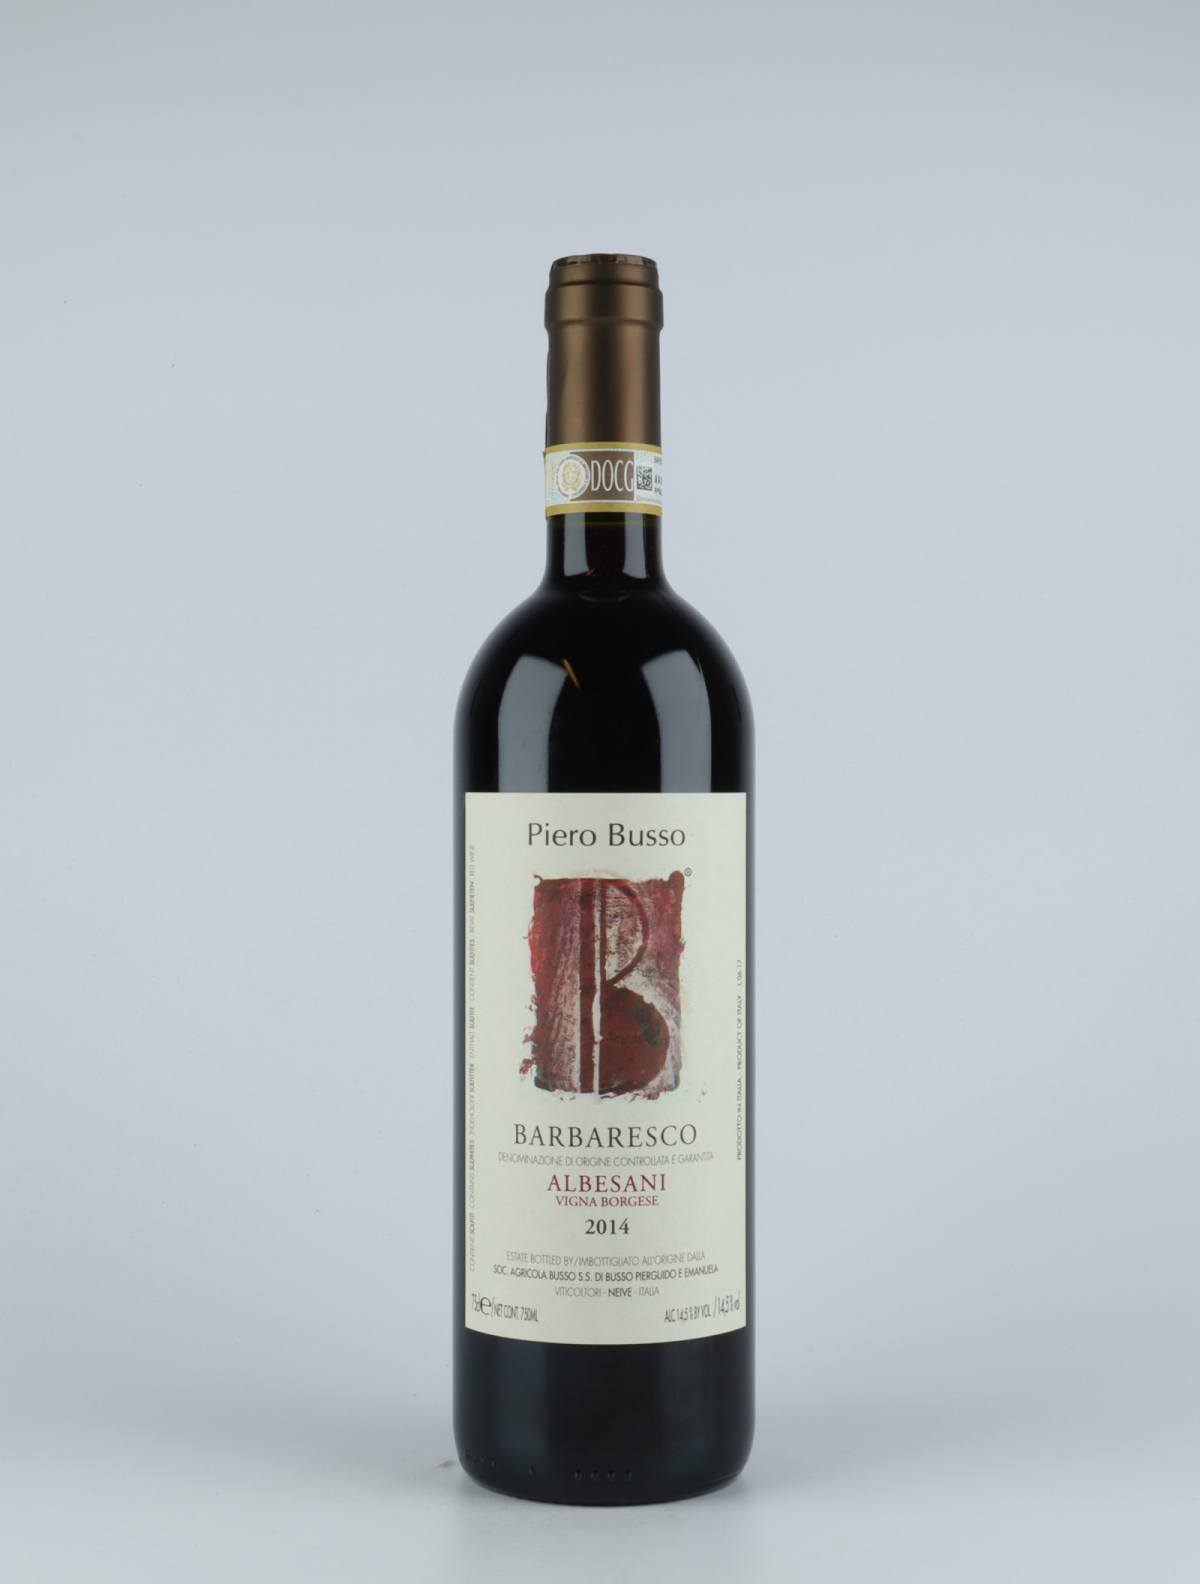 A bottle 2014 Barbaresco Albesani Vigna Borgese Red wine from Piero Busso, Piedmont in Italy